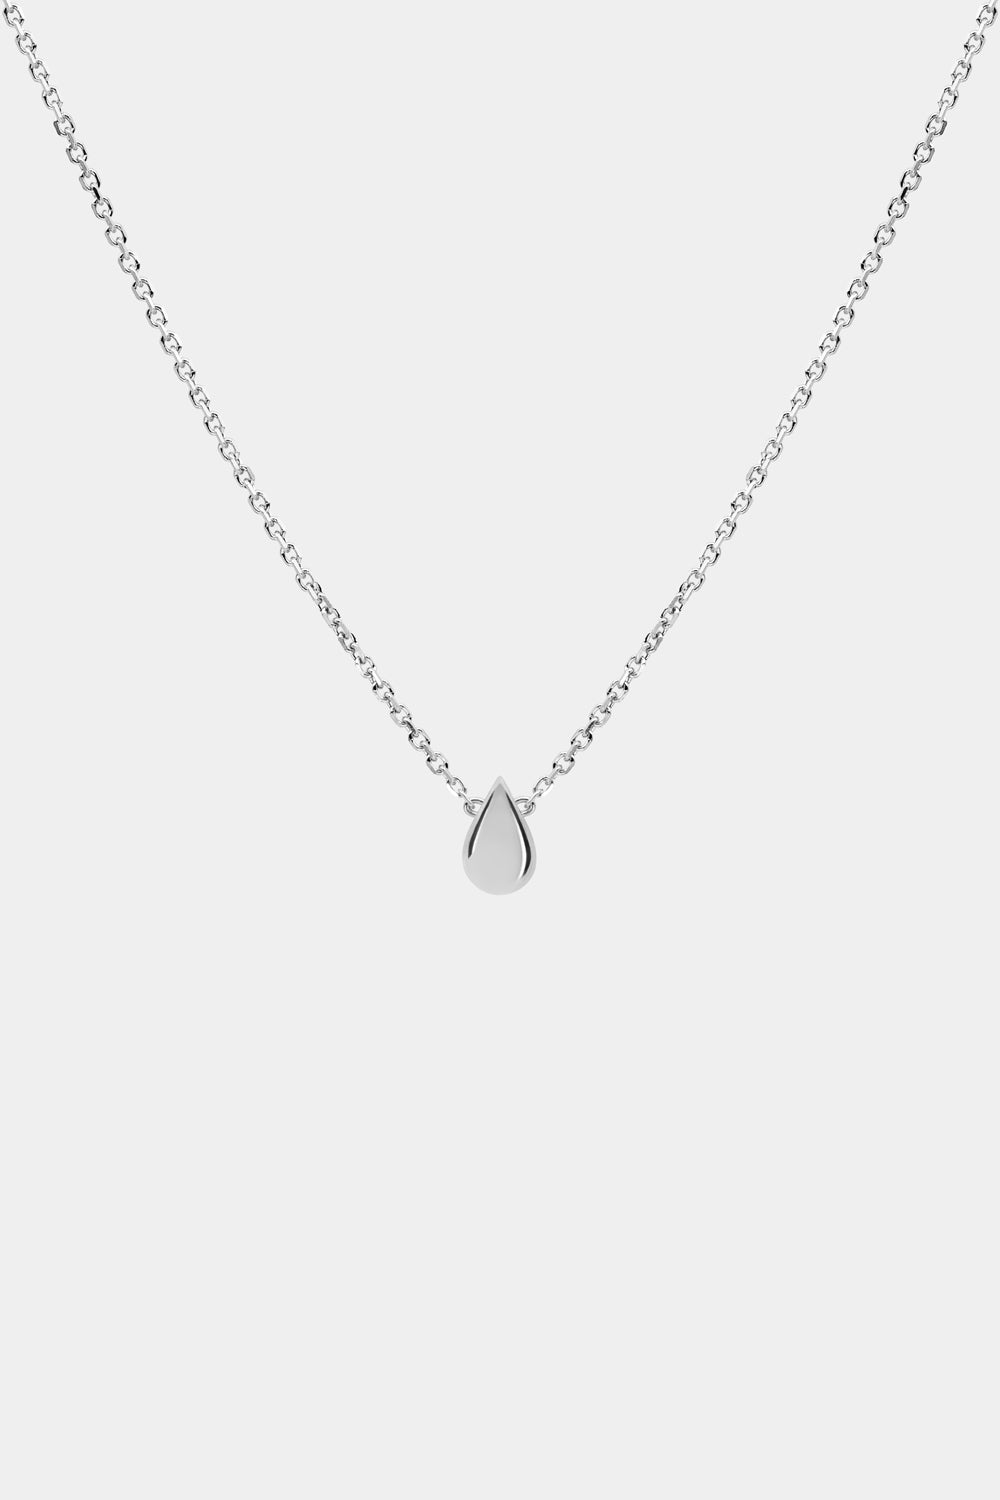 Pear Necklace | Silver or 9K White Gold, More Options Available